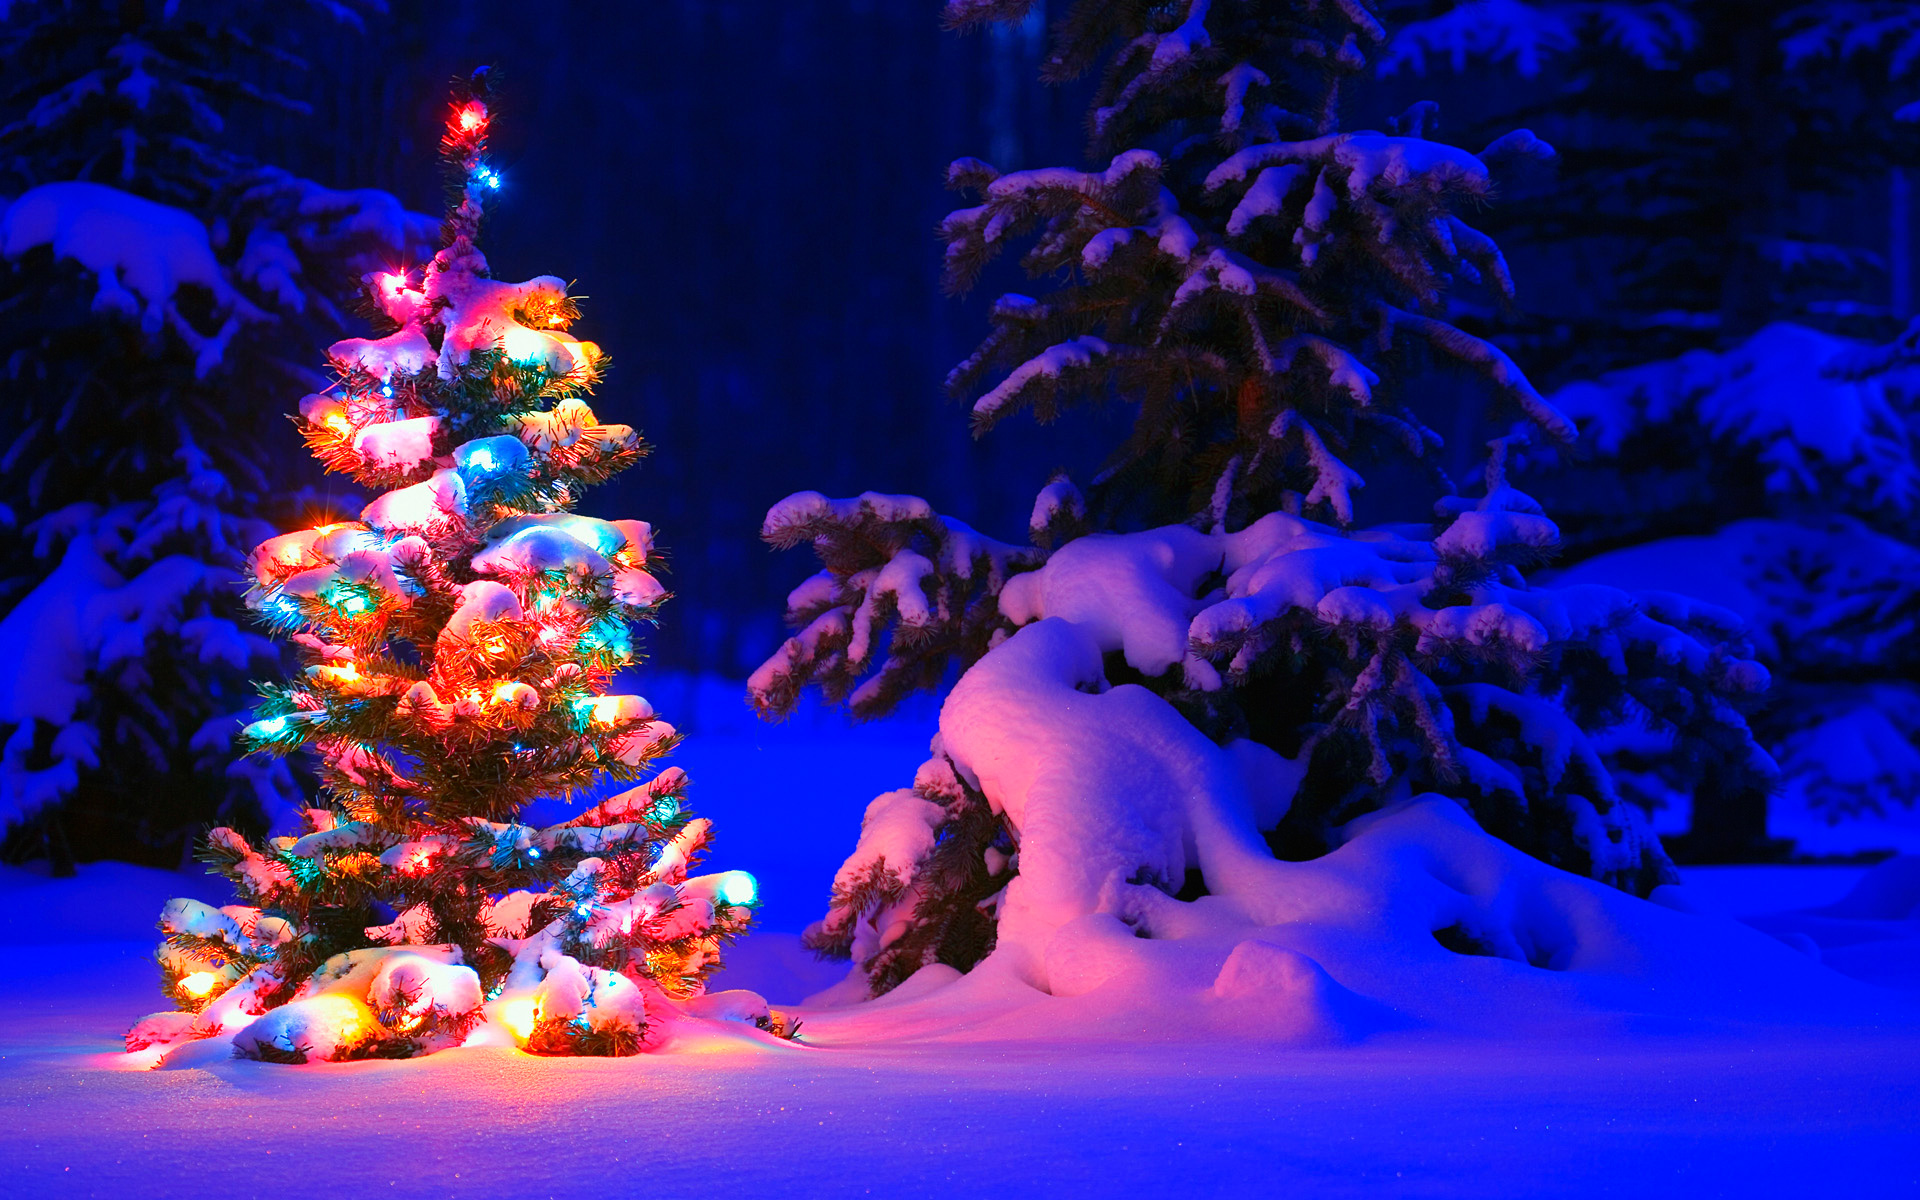 Christmas Wallpaper For Android Snowman - Snowy Christmas Tree With Lights - HD Wallpaper 